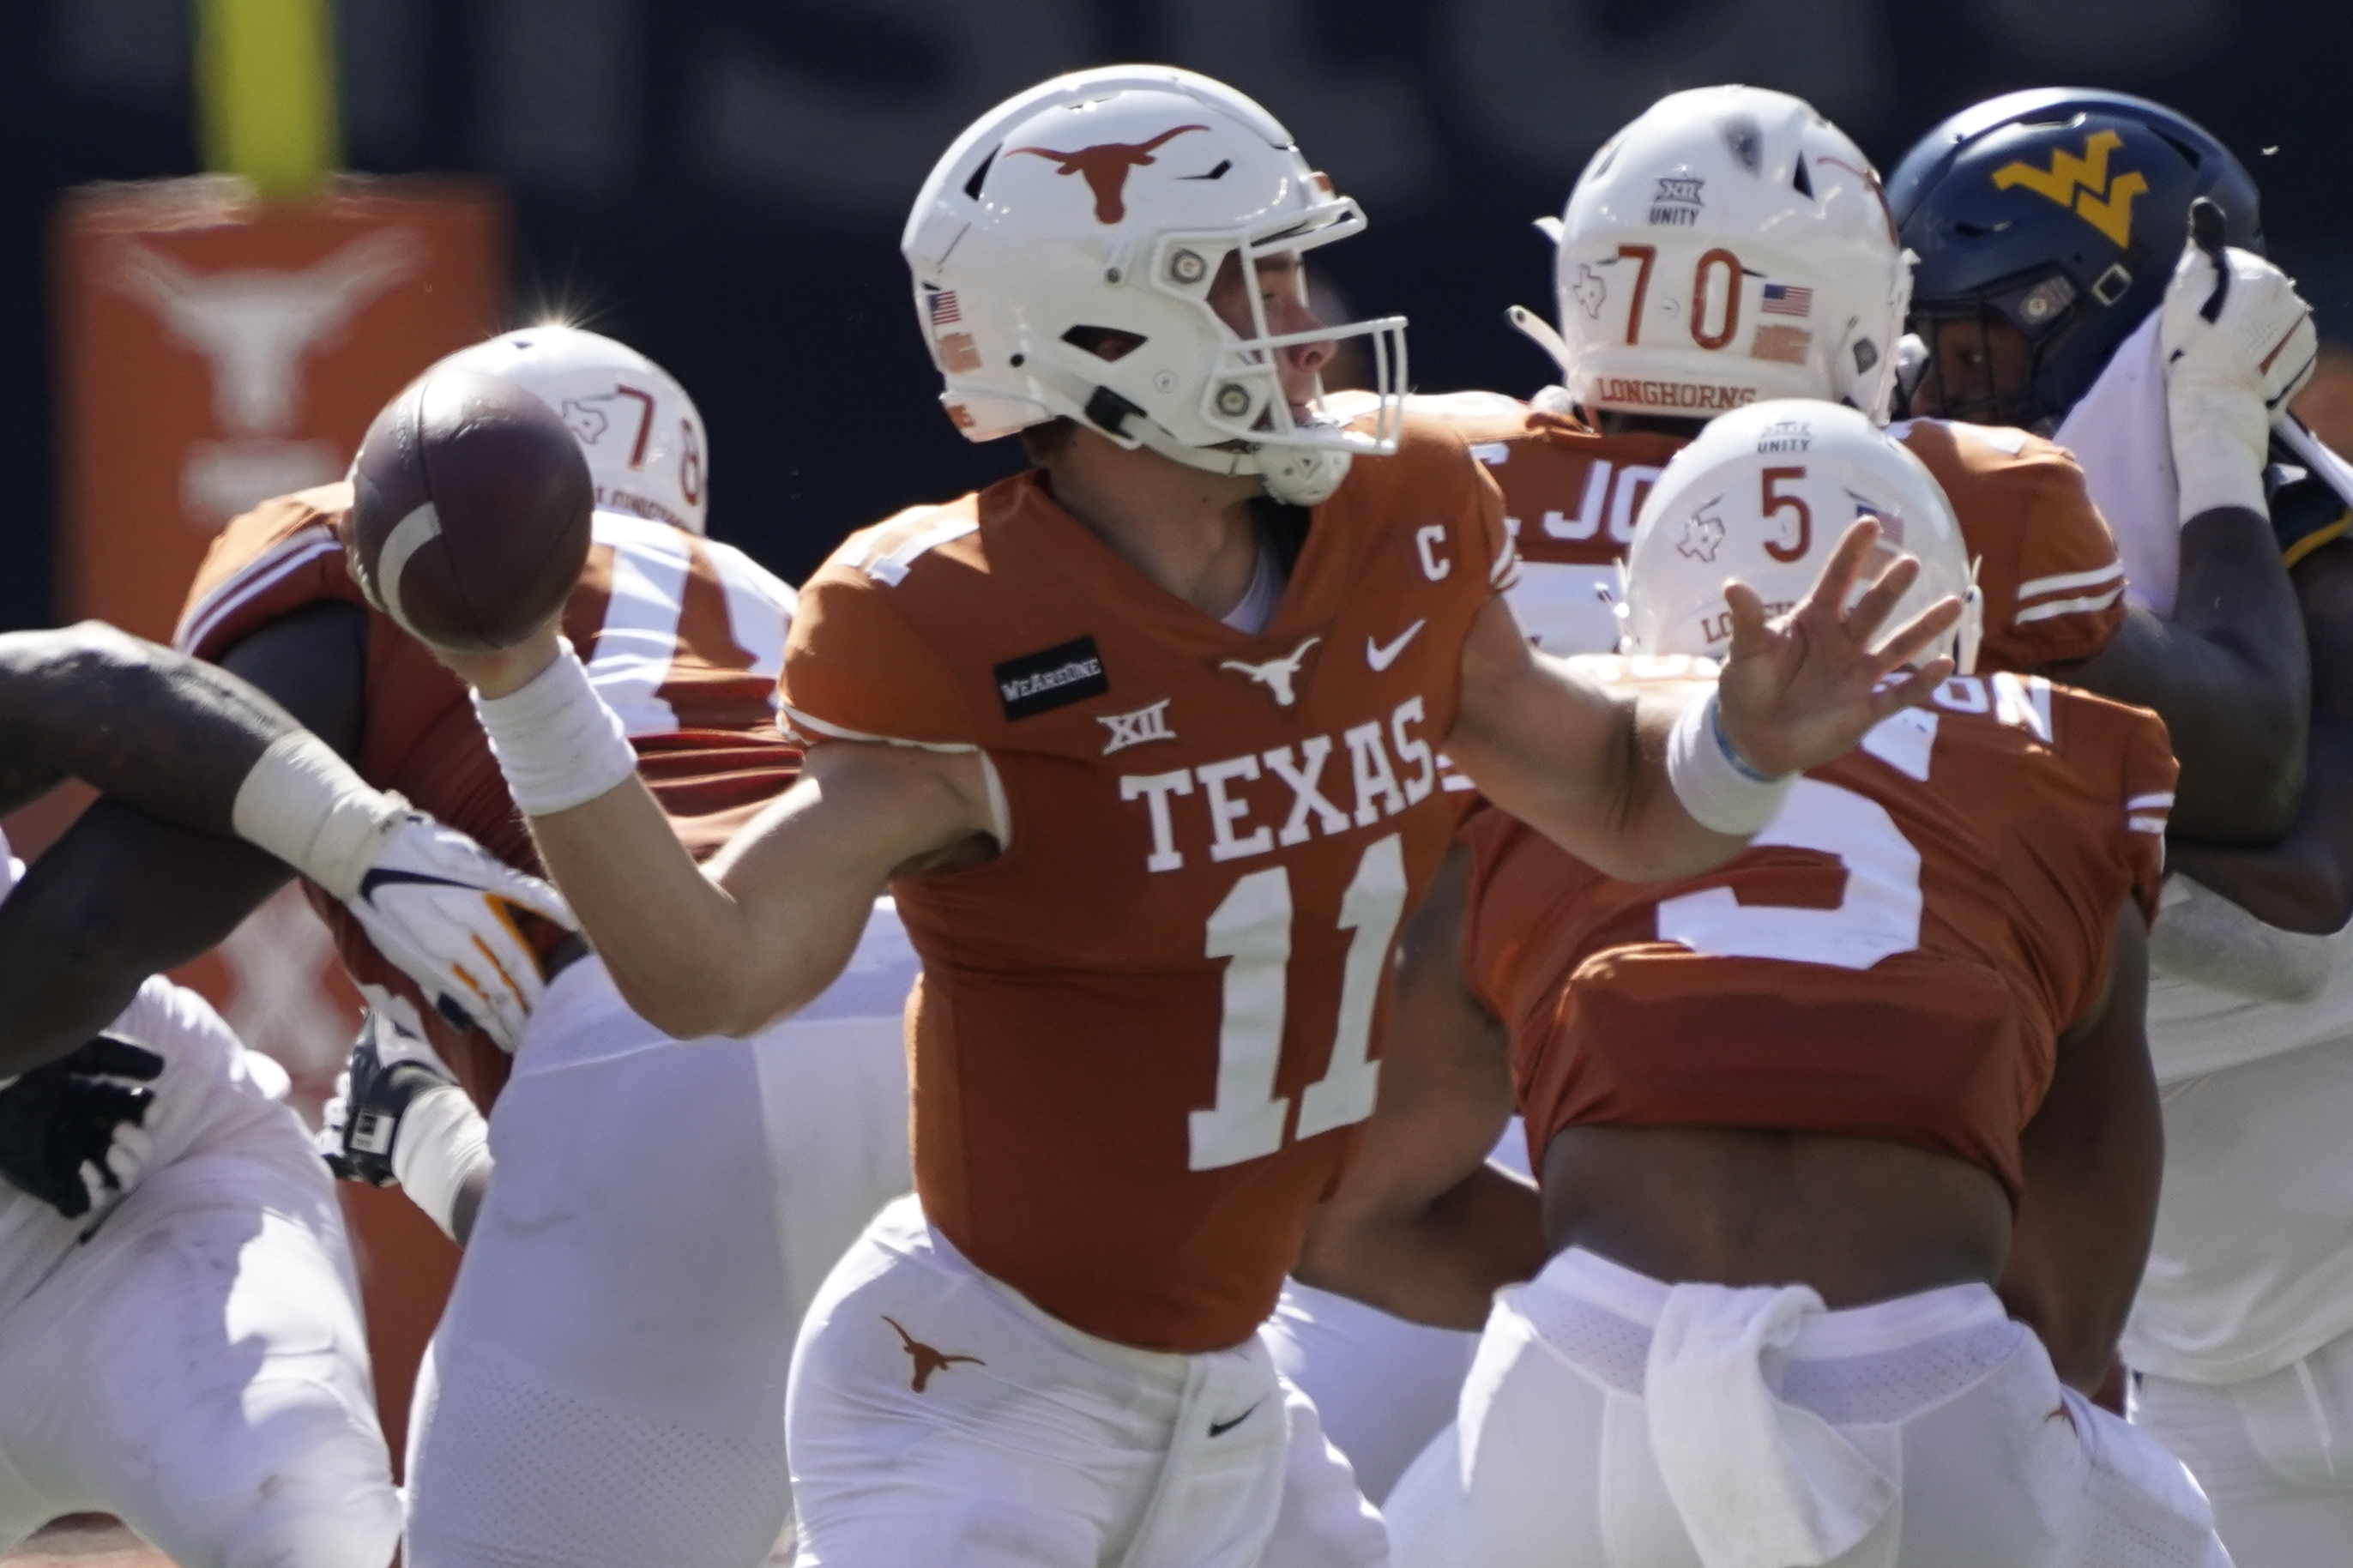 Texas QB Sam Ehlinger selected No. 218 by the Indianapolis Colts